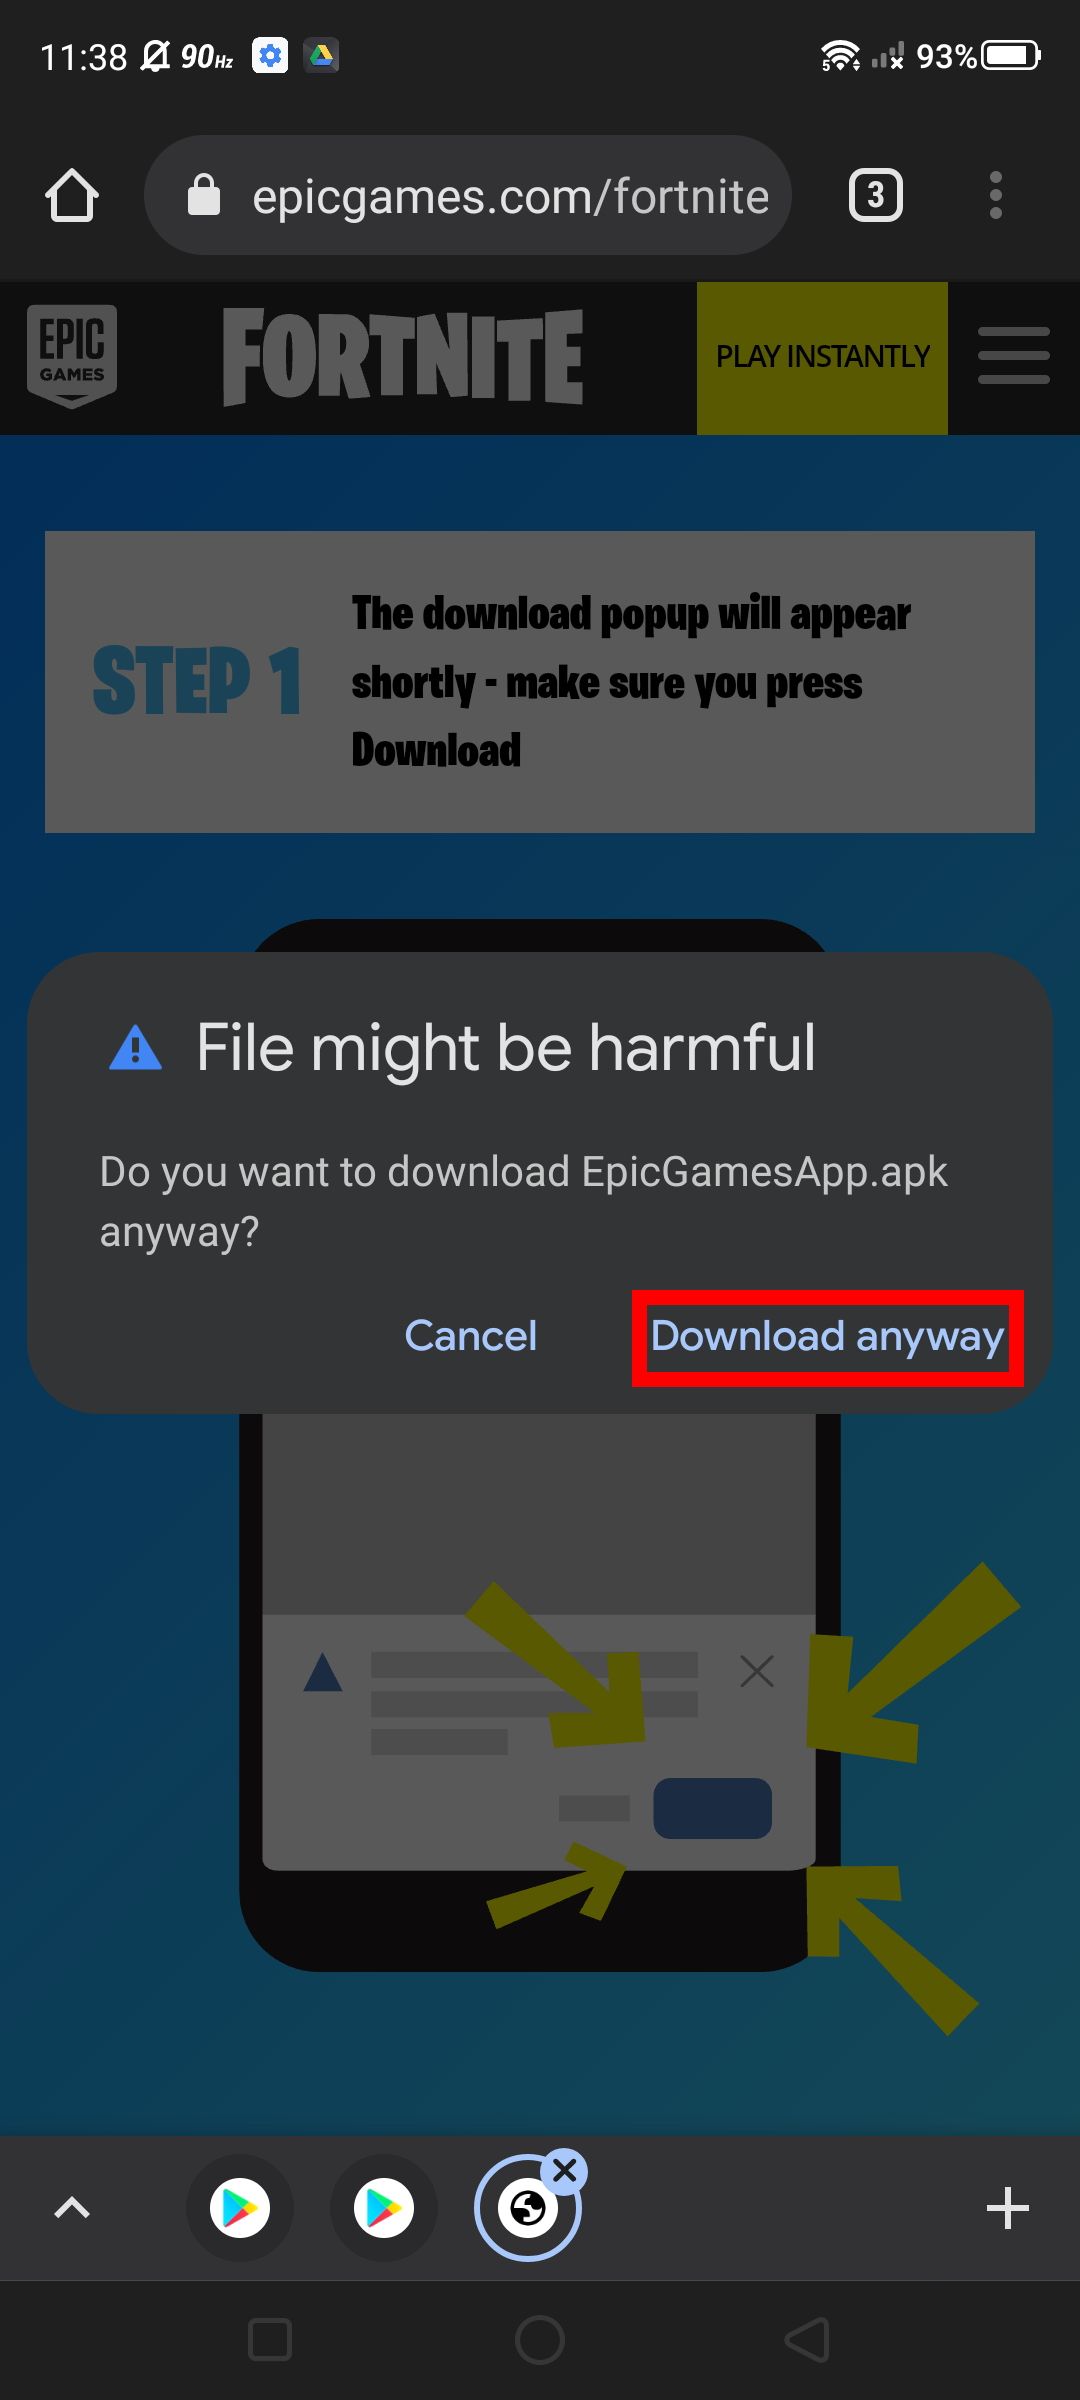 Download anyway option in unknown file message window